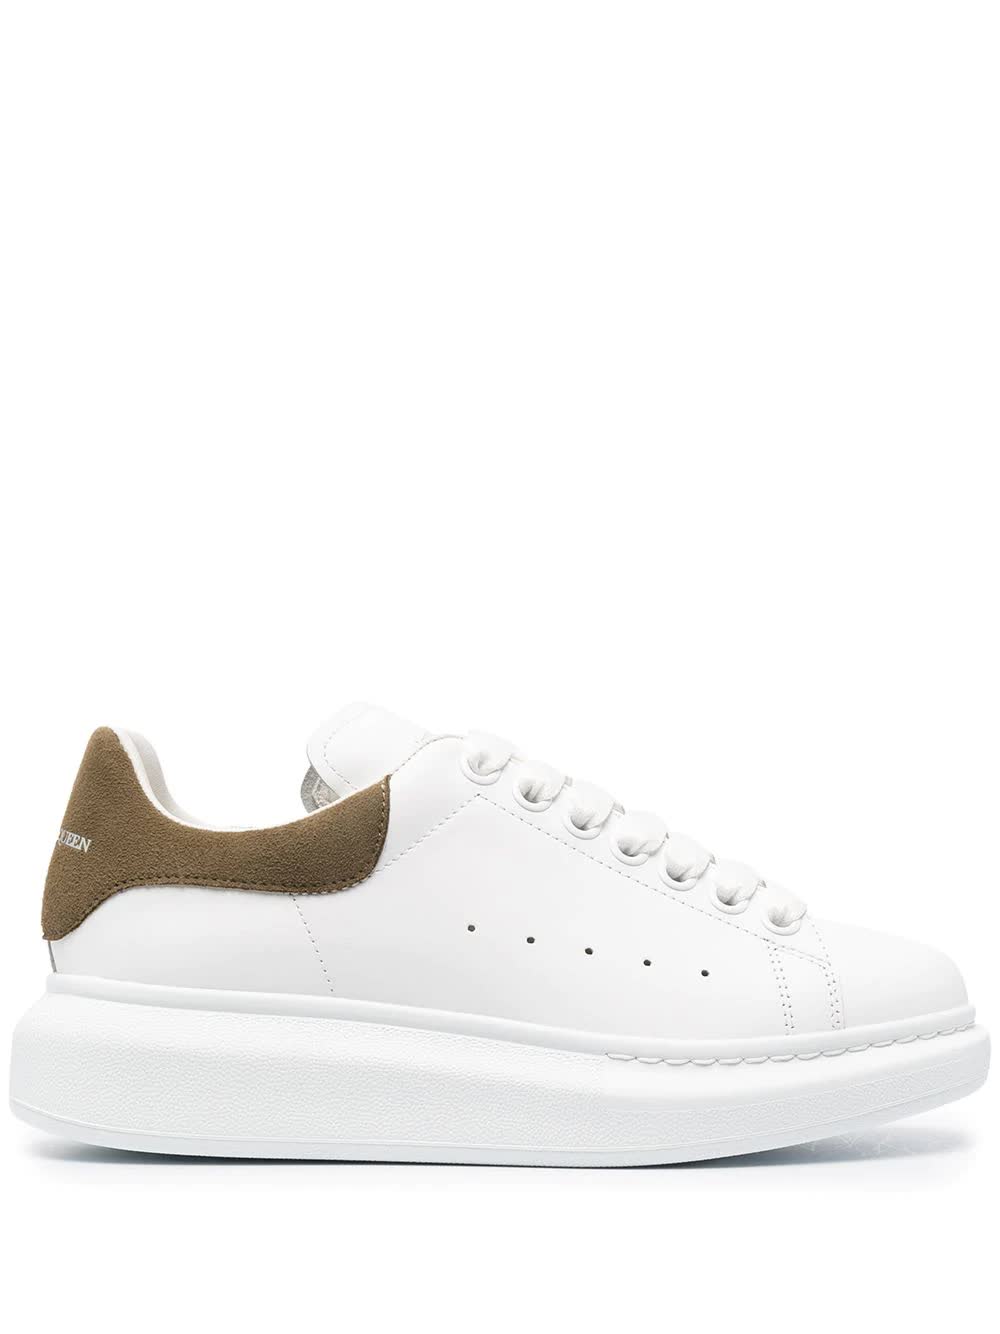 Alexander McQueen Woman White And Khaki Green Oversize Sneakers